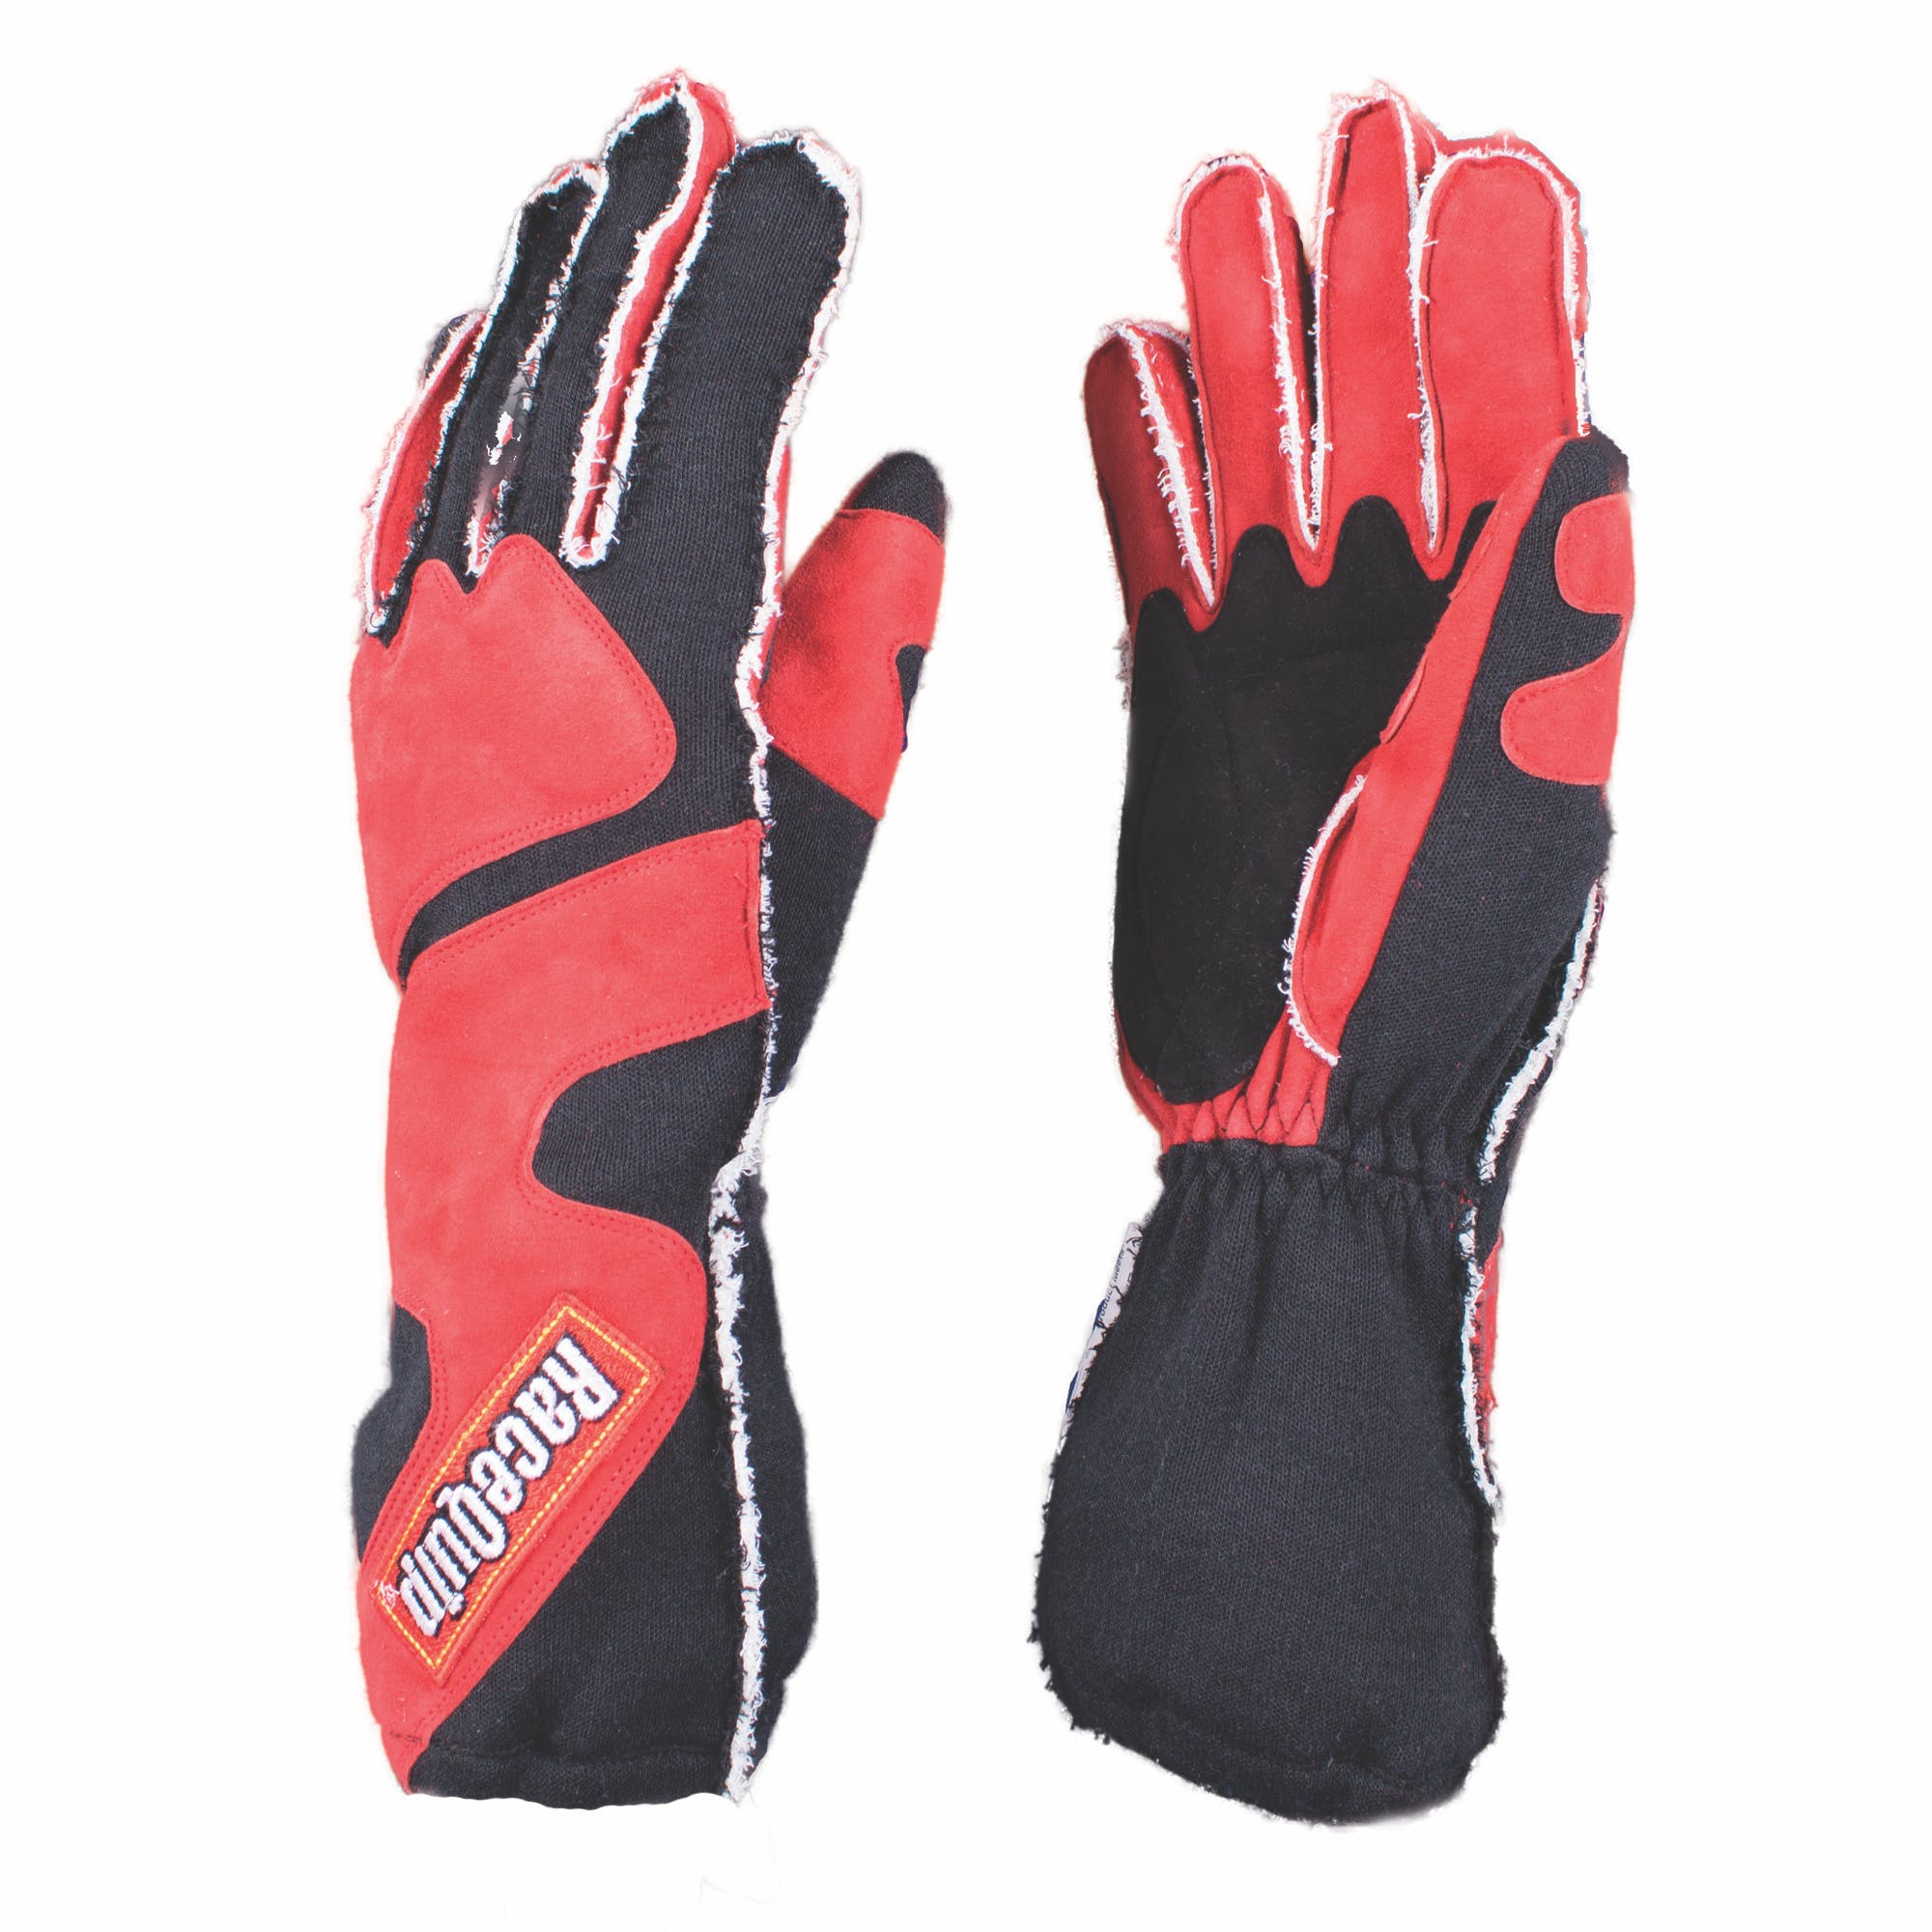 RaceQuip 356102 SFI-5 Angle-Cut Cuffed Racing Gloves (Red/Black, Small)